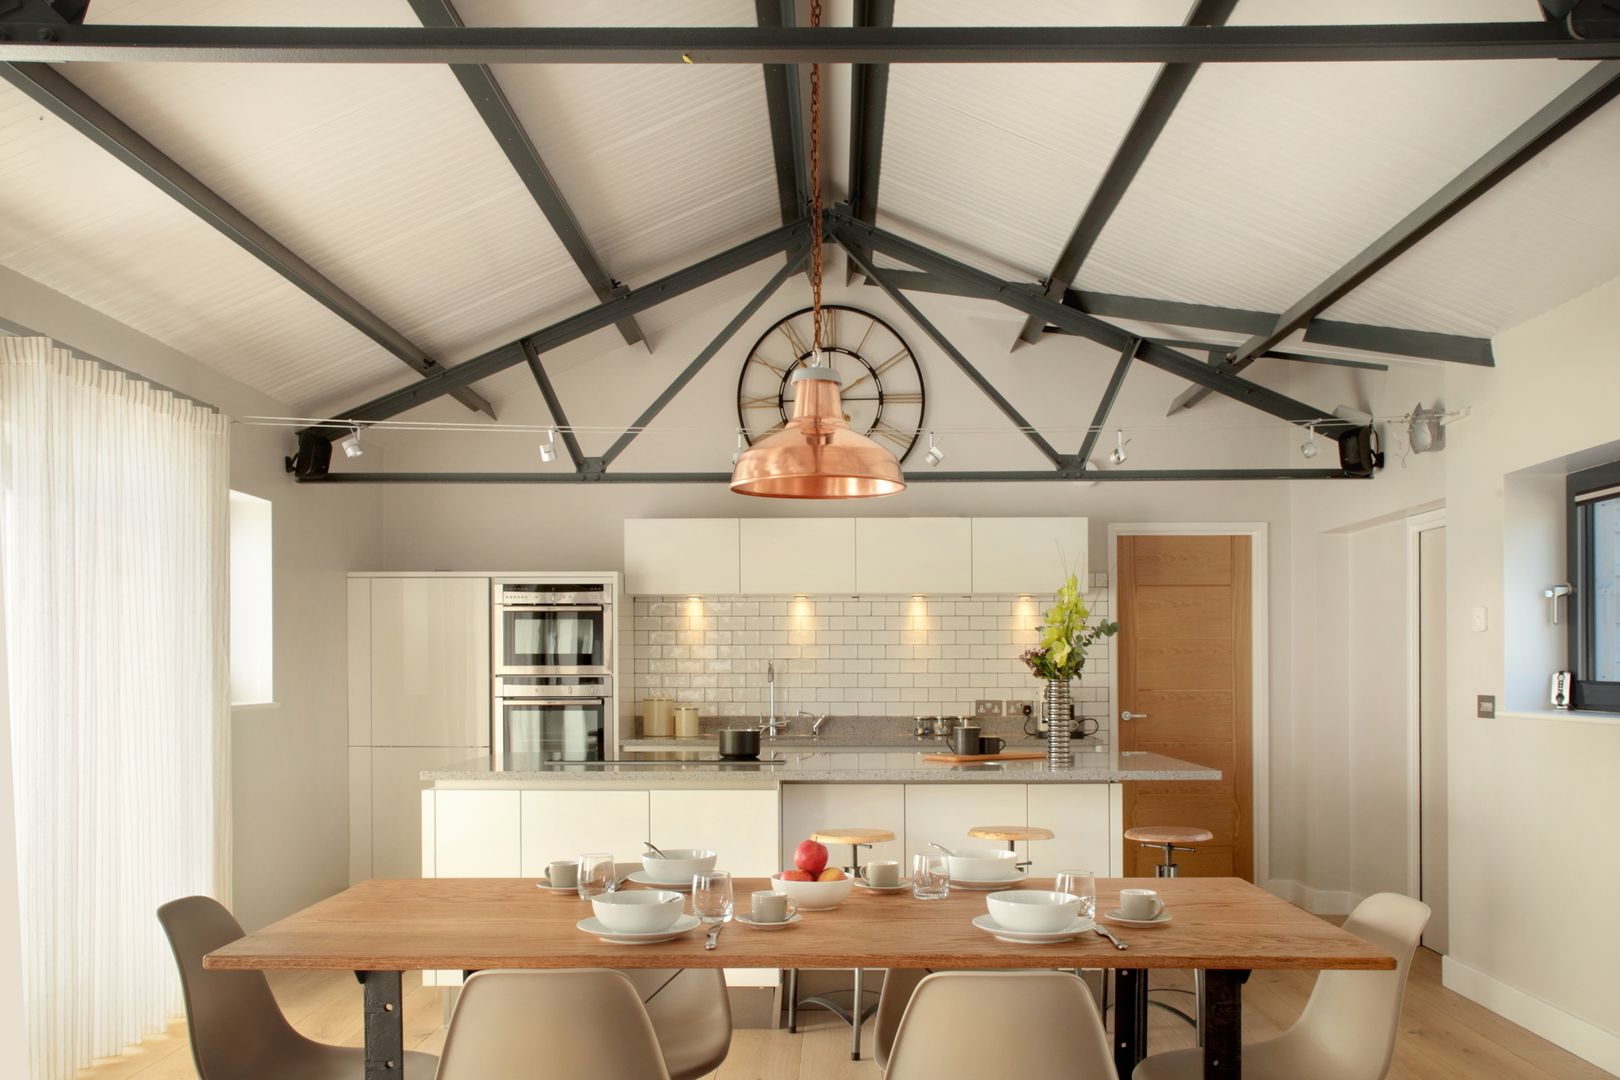 The Cow Shed Barn Conversion Kitchen in-toto Kitchens Design Studio Marlow Cocinas clásicas